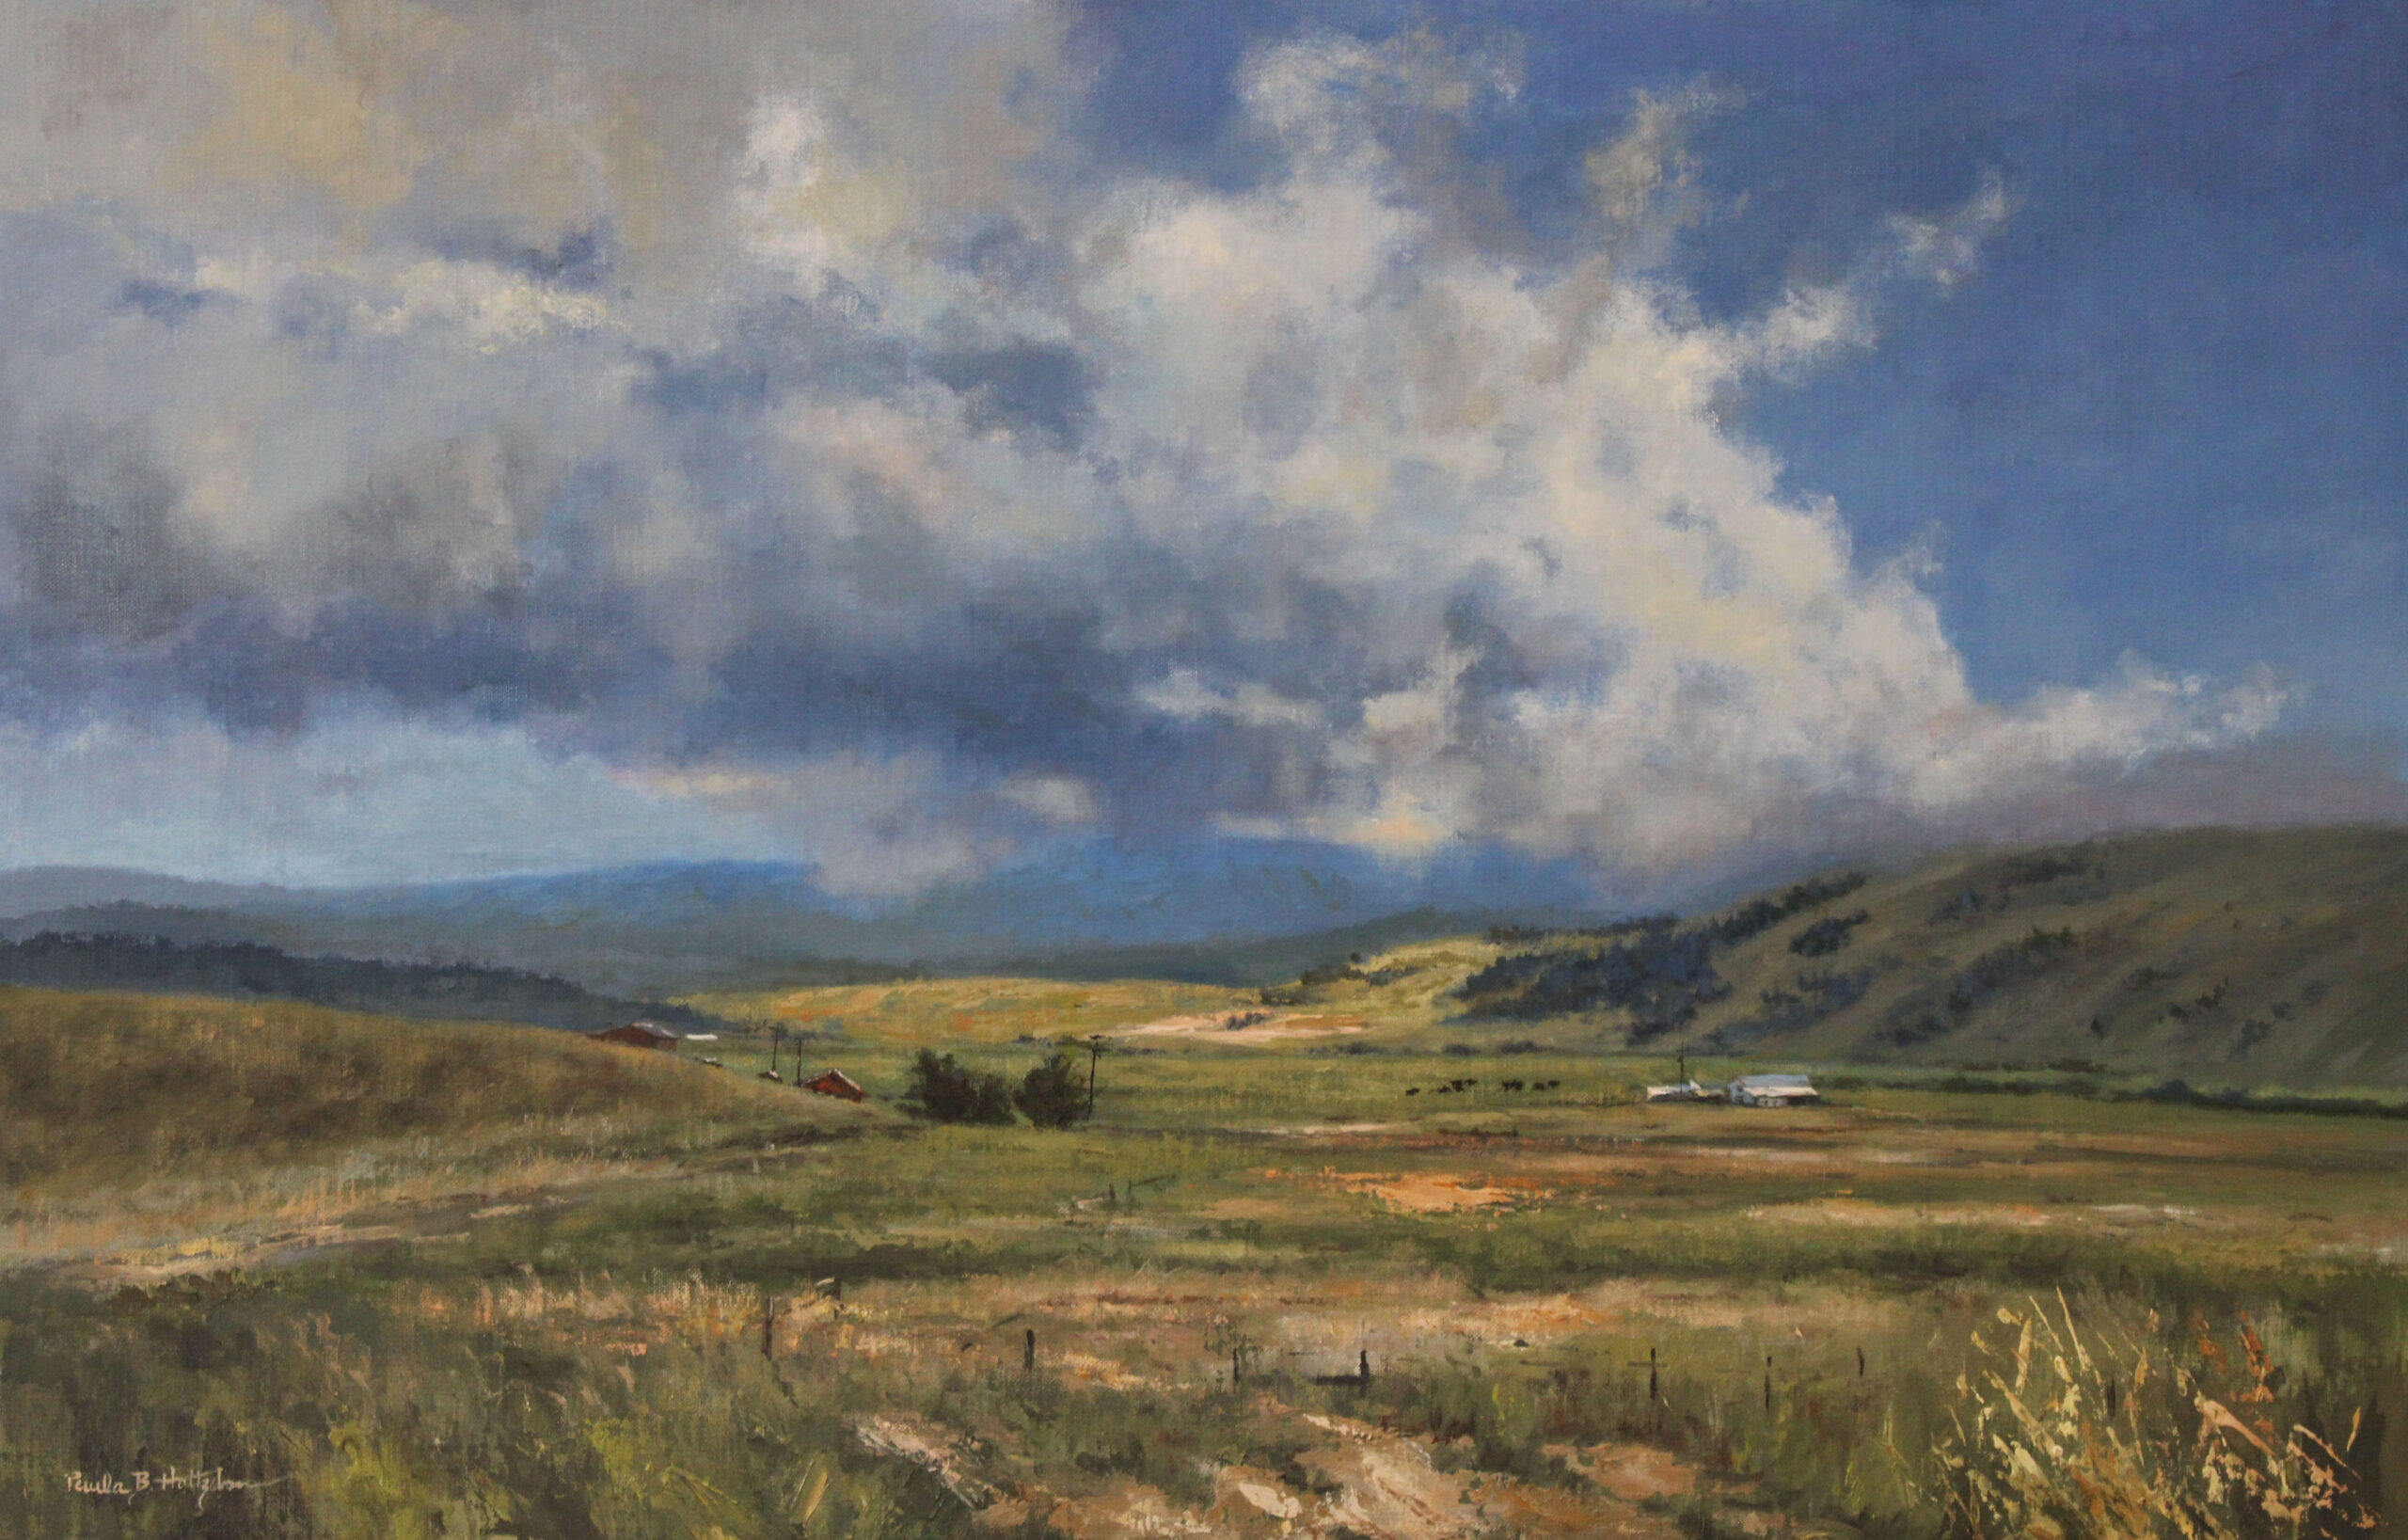 painting of a valley with a mountain range in the far background, big puffy clouds in the mid-ground